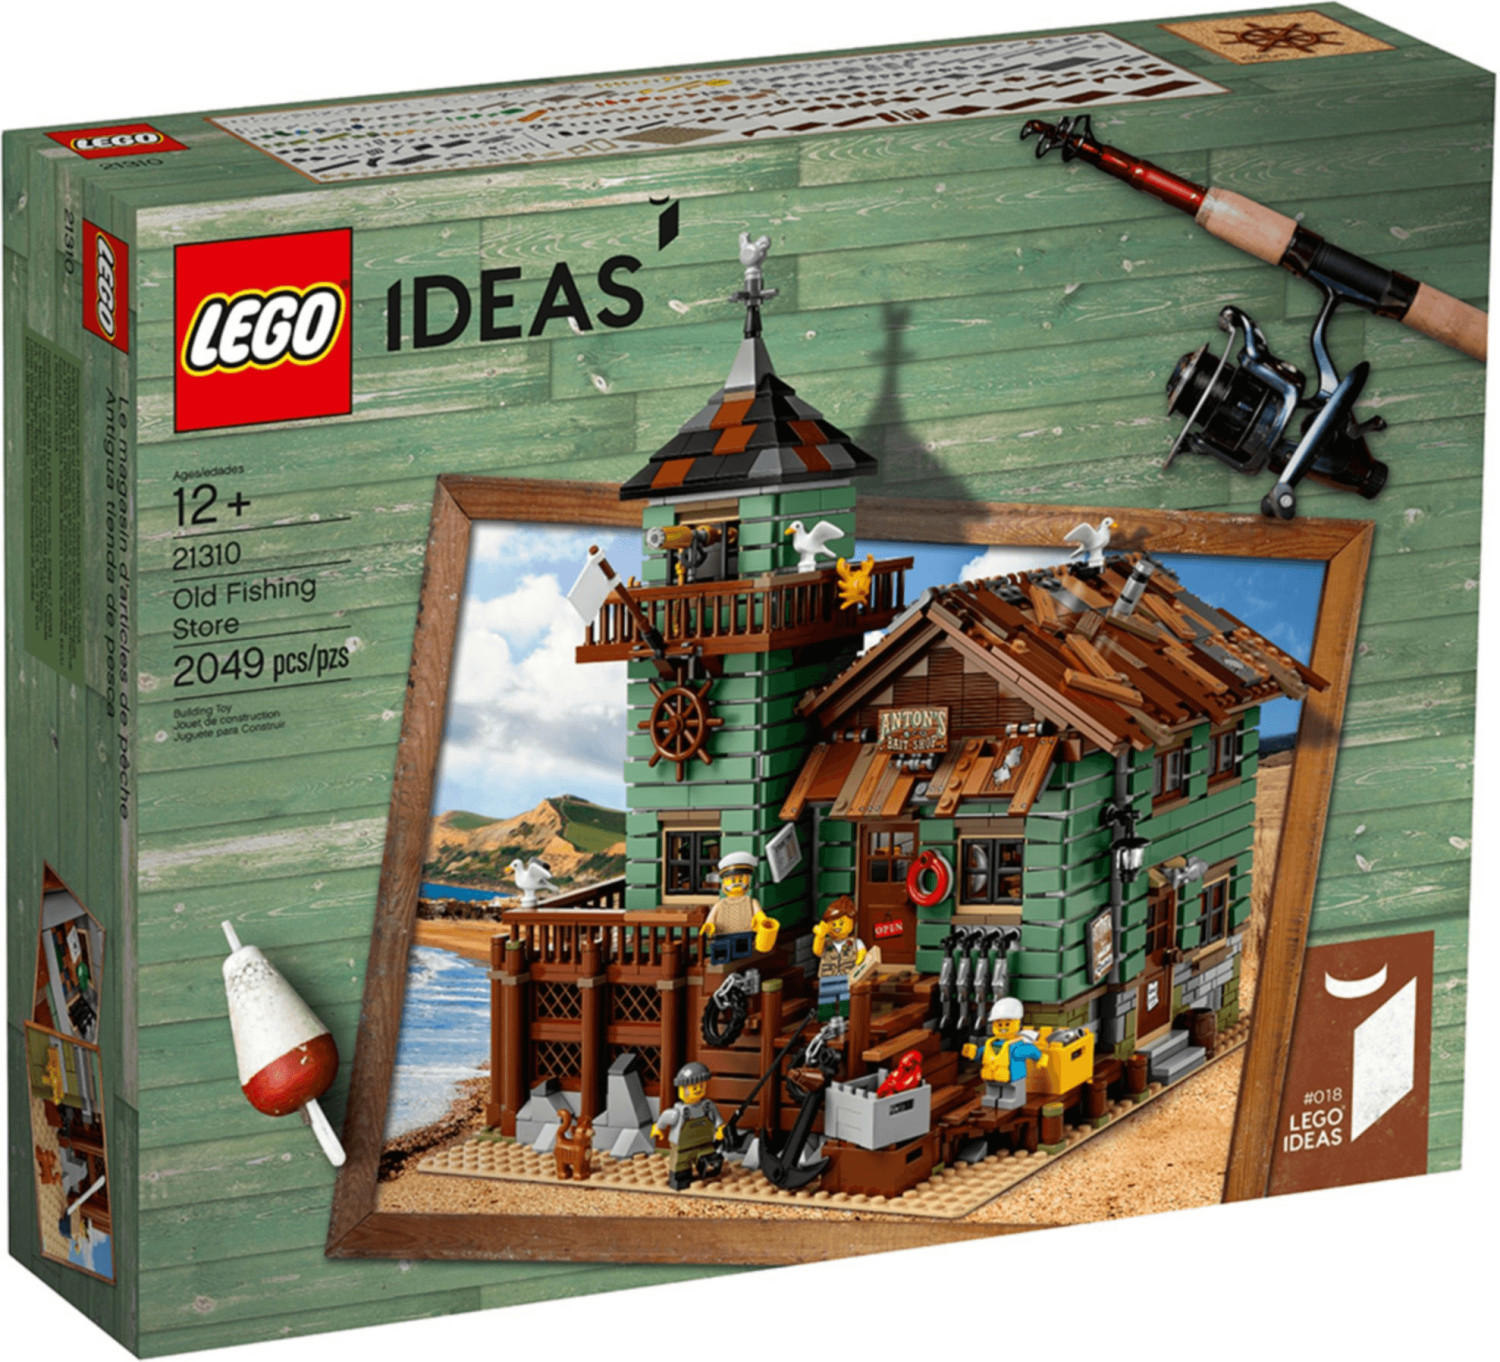 LEGO Ideas - Old Fishing Store (21310)